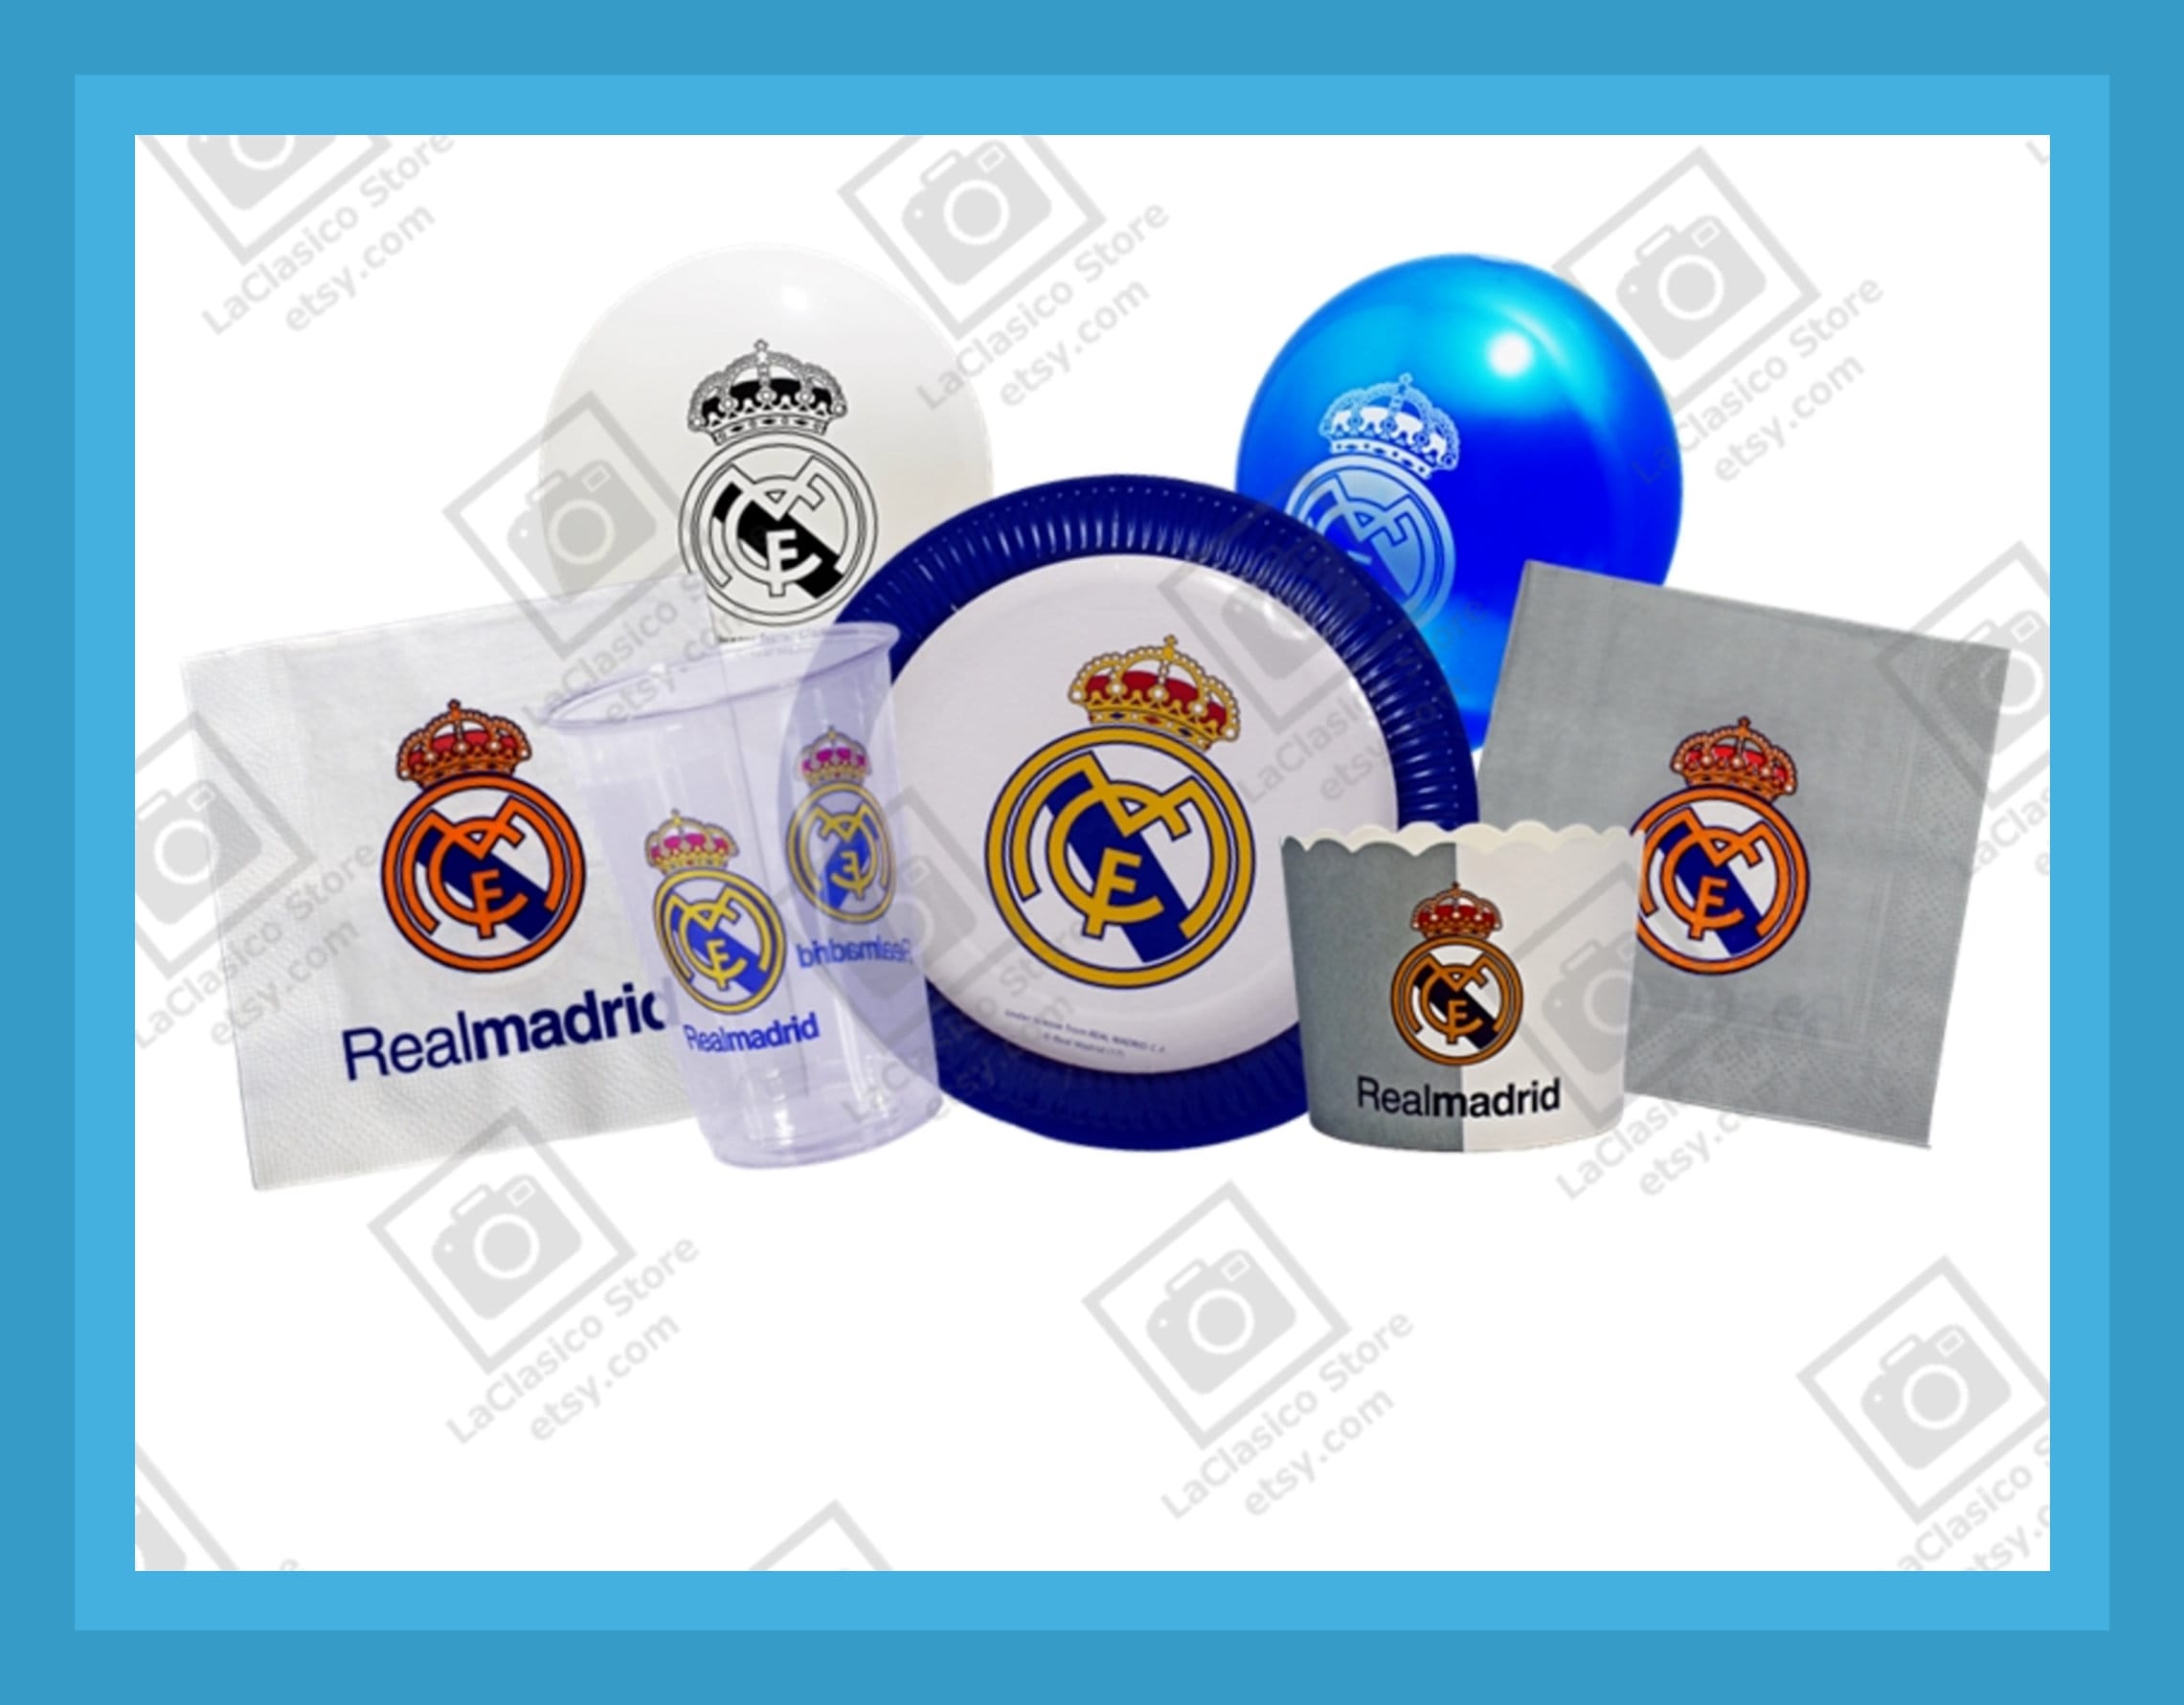 All In One! Real Madrid Party Set Birthday 50 PCS Decoration Plates Cups Balloons Napkins